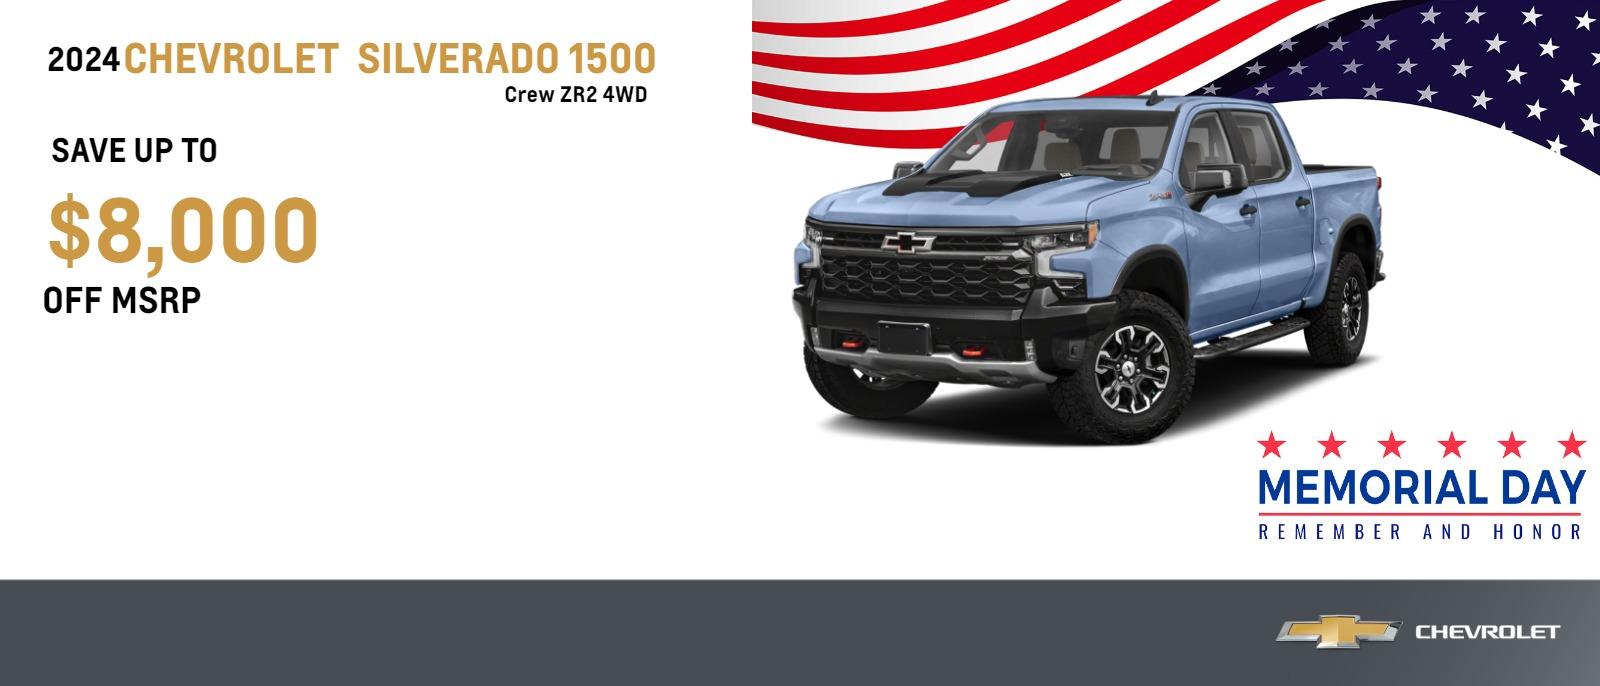 2024 Chevrolet Silverado 1500 Crew RST 4WD

OFFER = Save up to $8,000 OFF MSRP